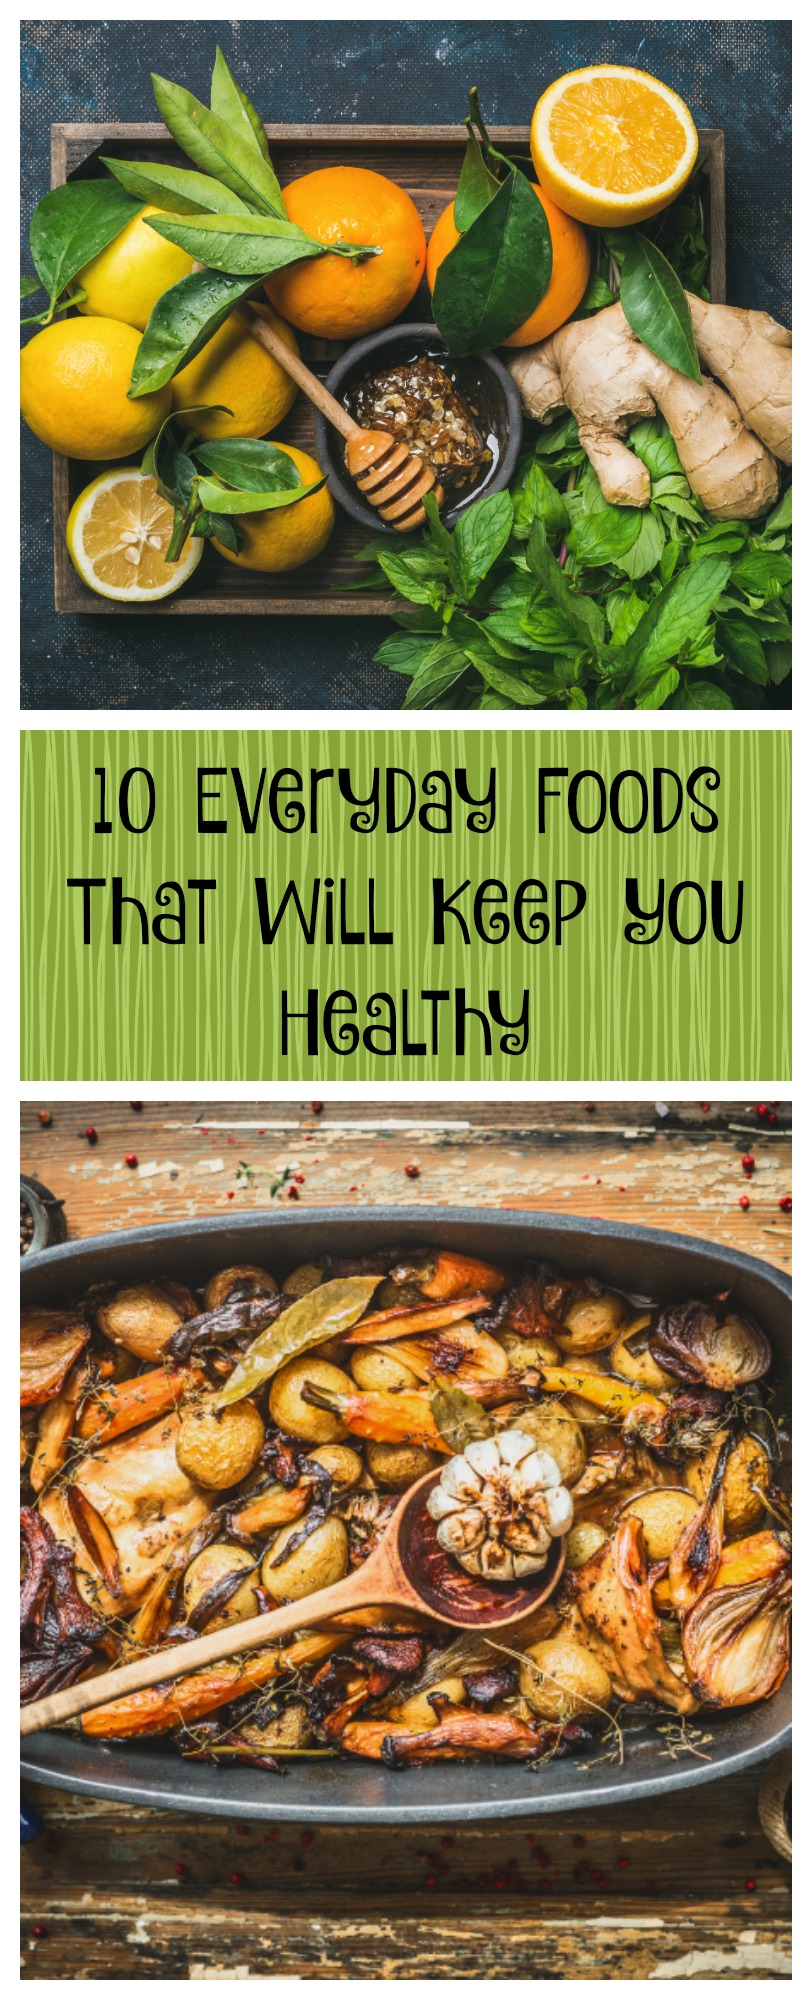 10 everyday foods that will keep  you healthy